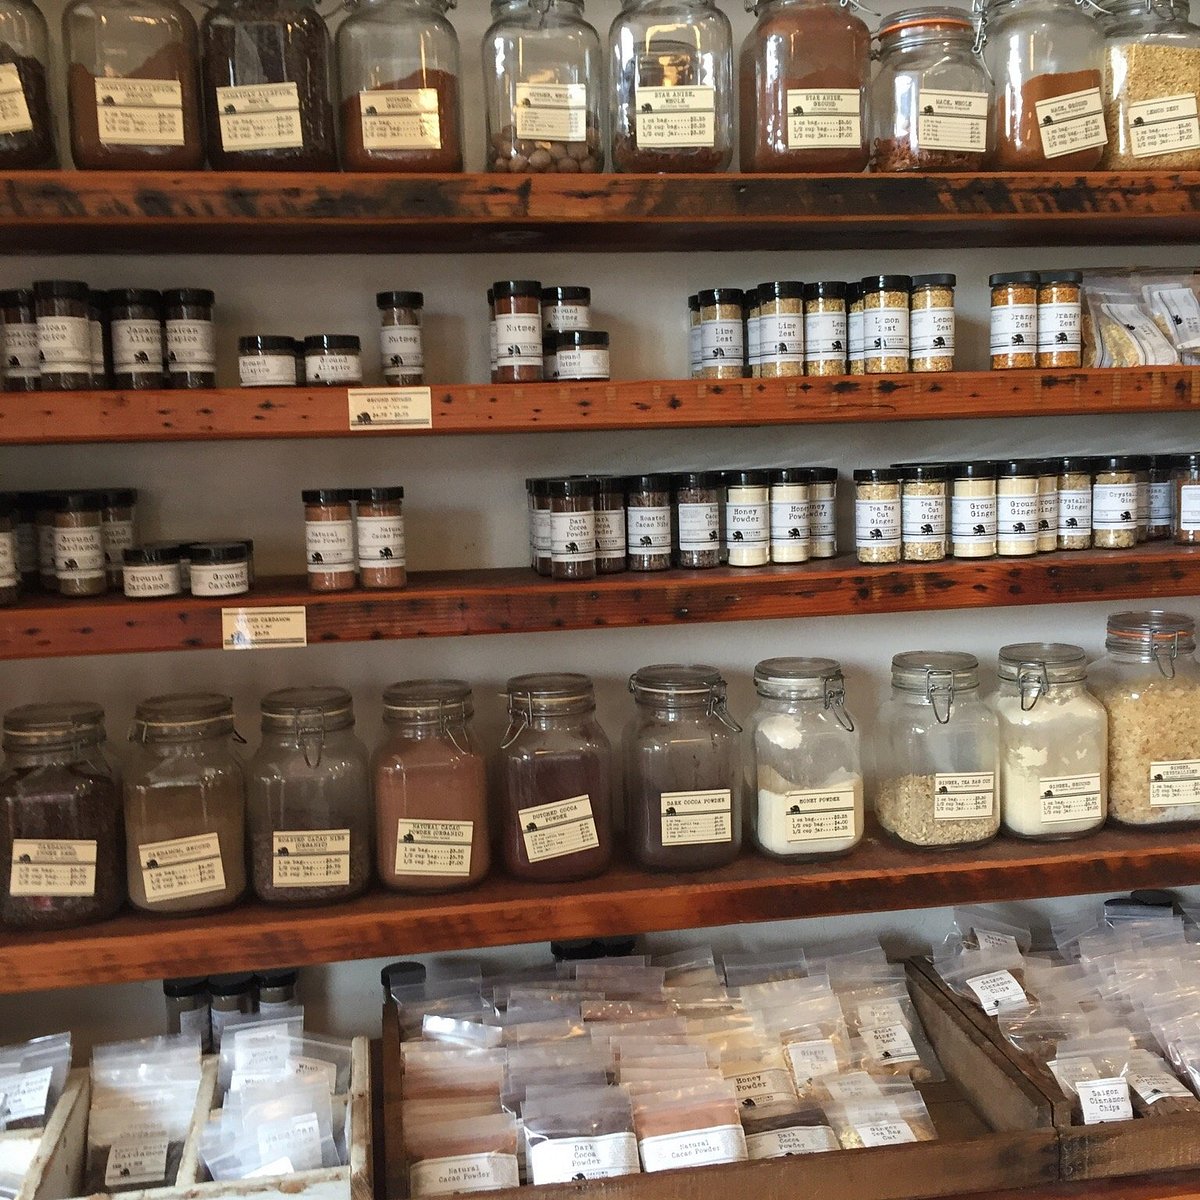 Chinese Five Spice - Oaktown Spice Shop